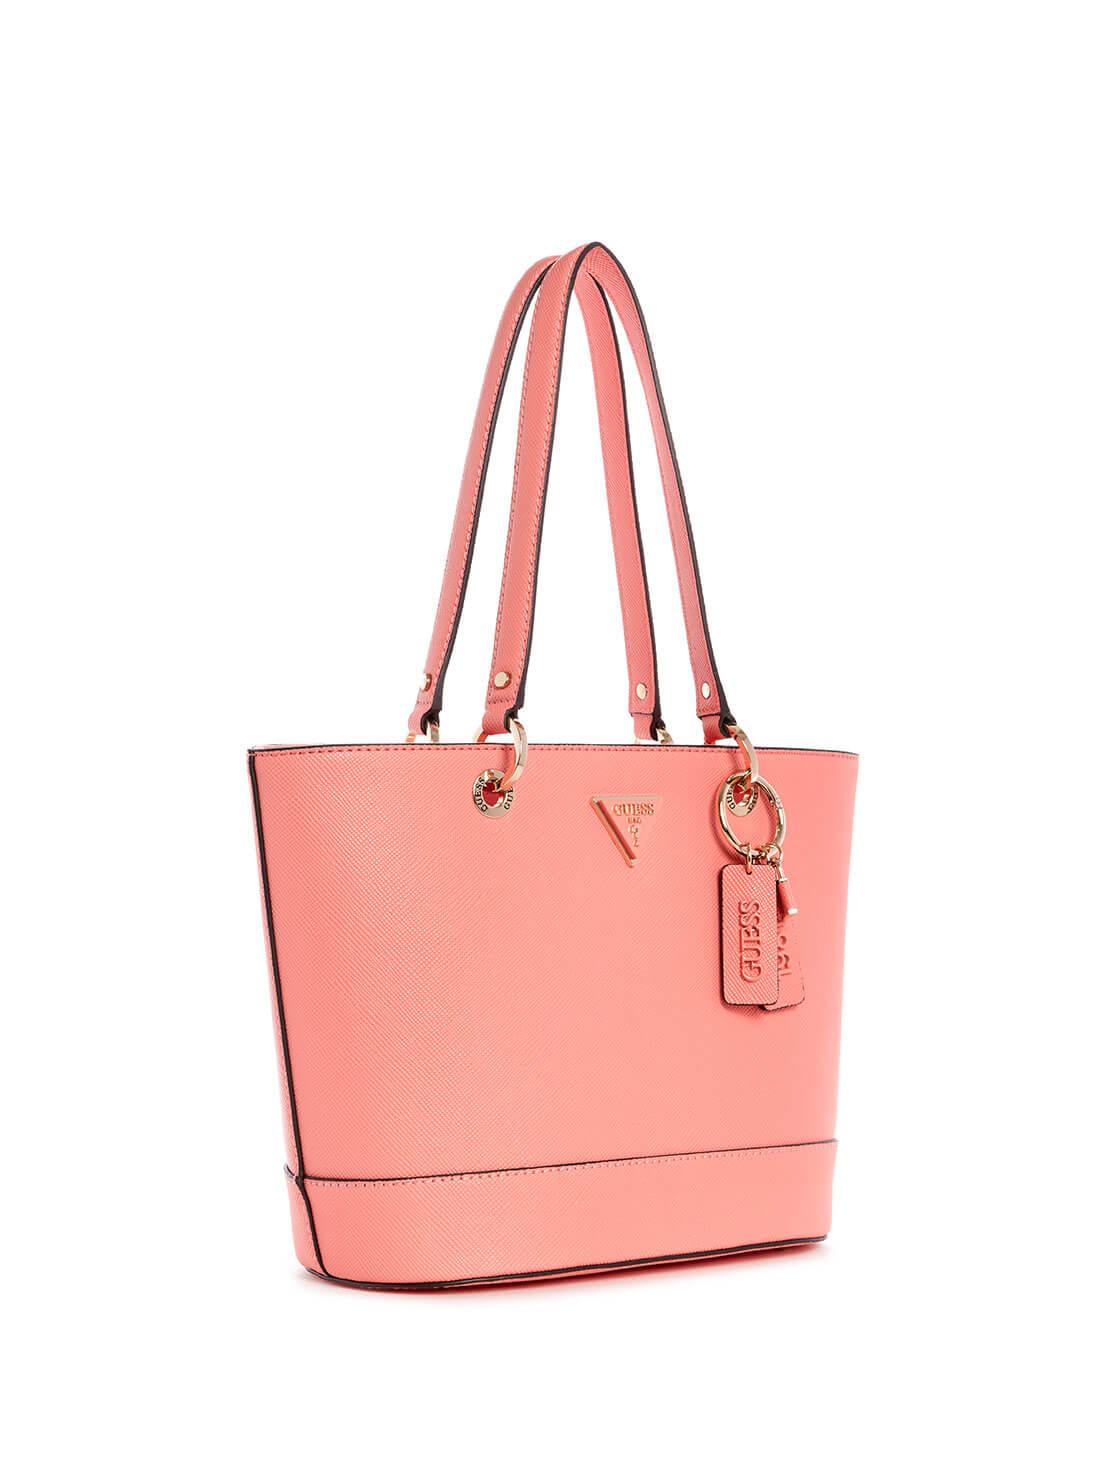 GUESS Womens  Pink Noelle Small Elite Tote Bag ZG787922 Front Side View